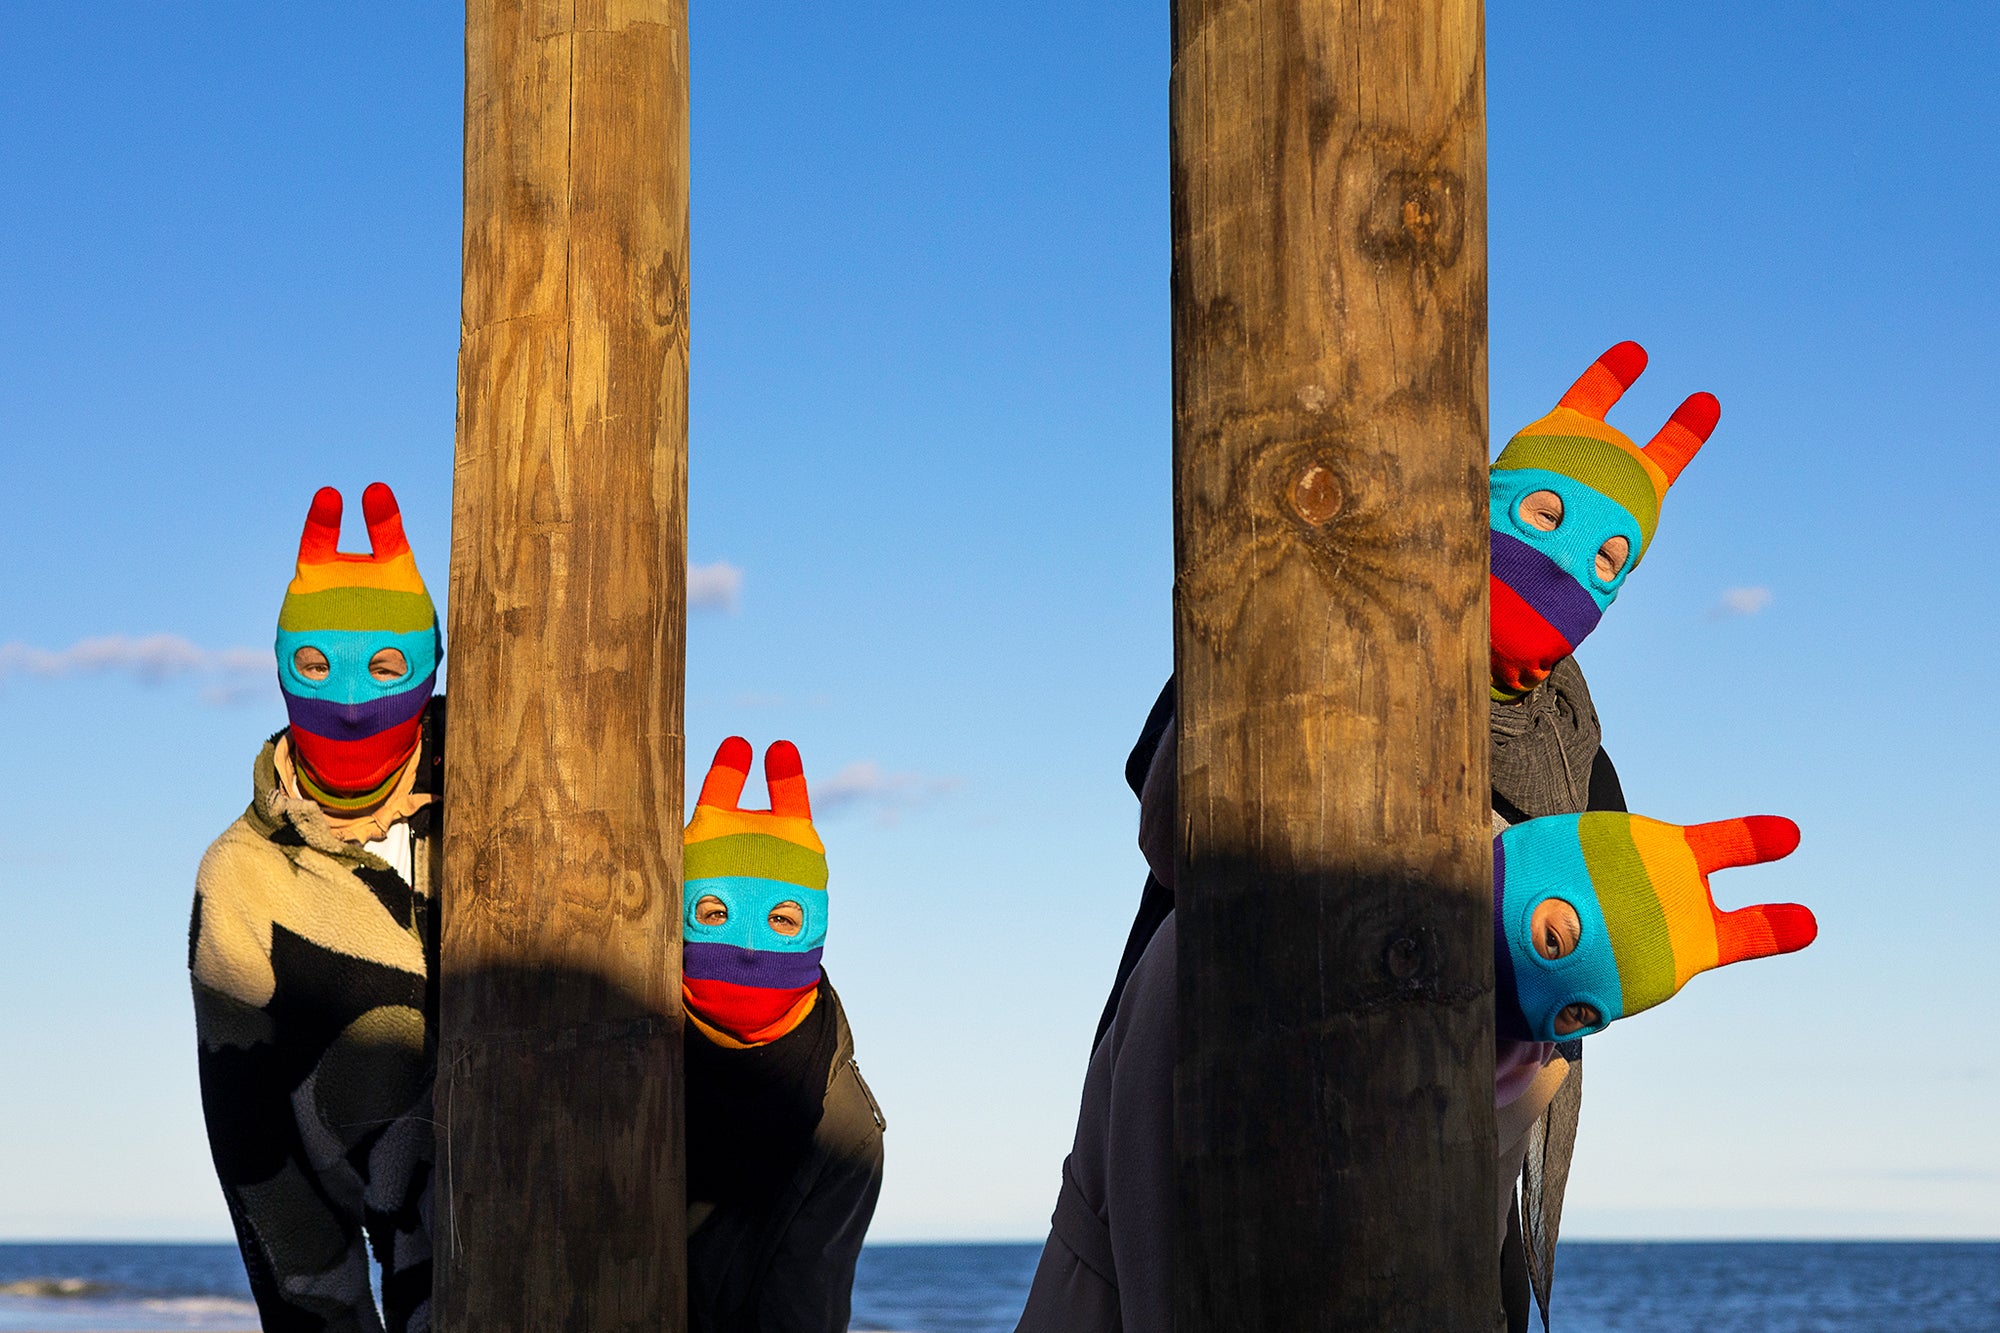 a group of 4 people in rainbow balaclavas peeking out from behind wooden pillars